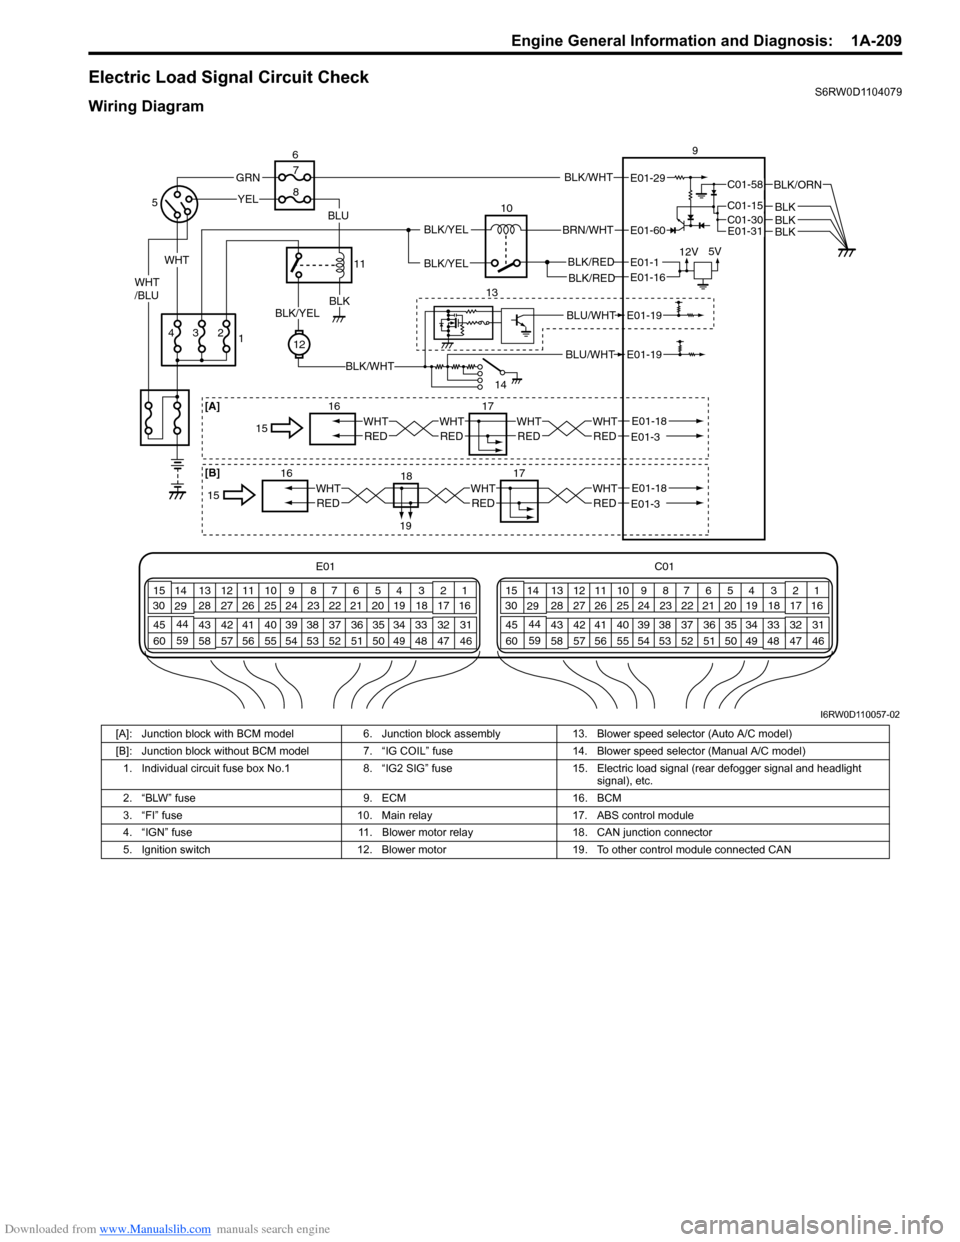 SUZUKI SX4 2006 1.G Service Owners Guide Downloaded from www.Manualslib.com manuals search engine Engine General Information and Diagnosis:  1A-209
Electric Load Signal Circuit CheckS6RW0D1104079
Wiring Diagram
E01 C01
3 4
18 19 5 6 7 10 11
